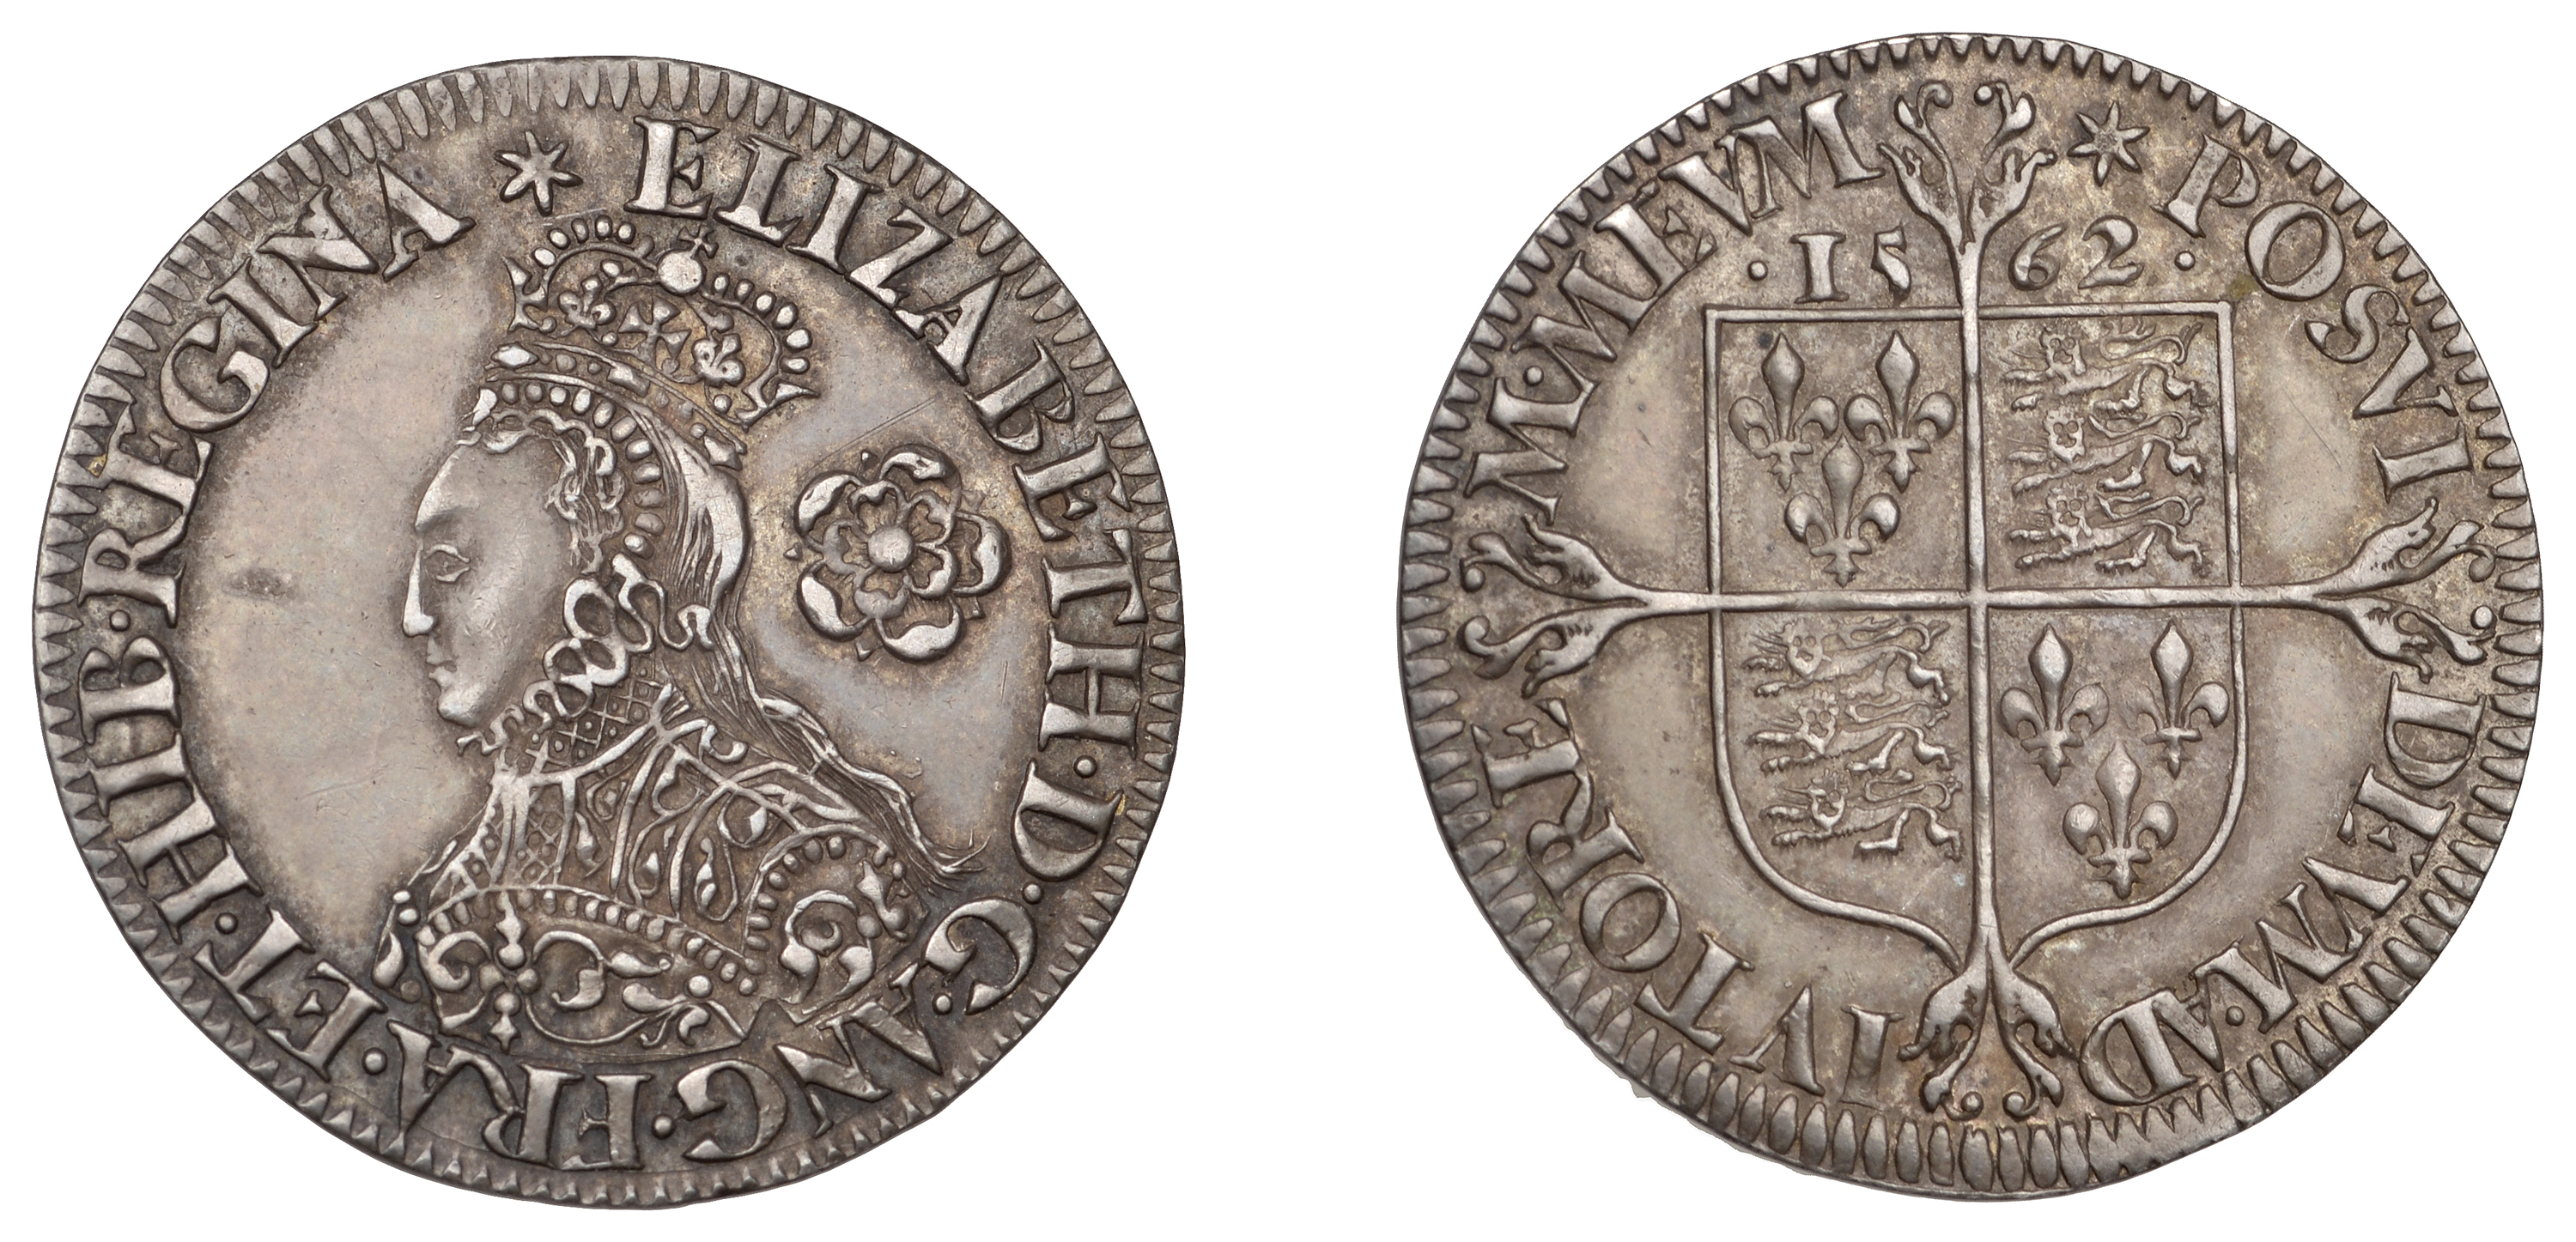 Elizabeth I (1558-1603), Milled coinage, Sixpence, 1562, mm. star, bust C, 2.66g/7h (Borden...